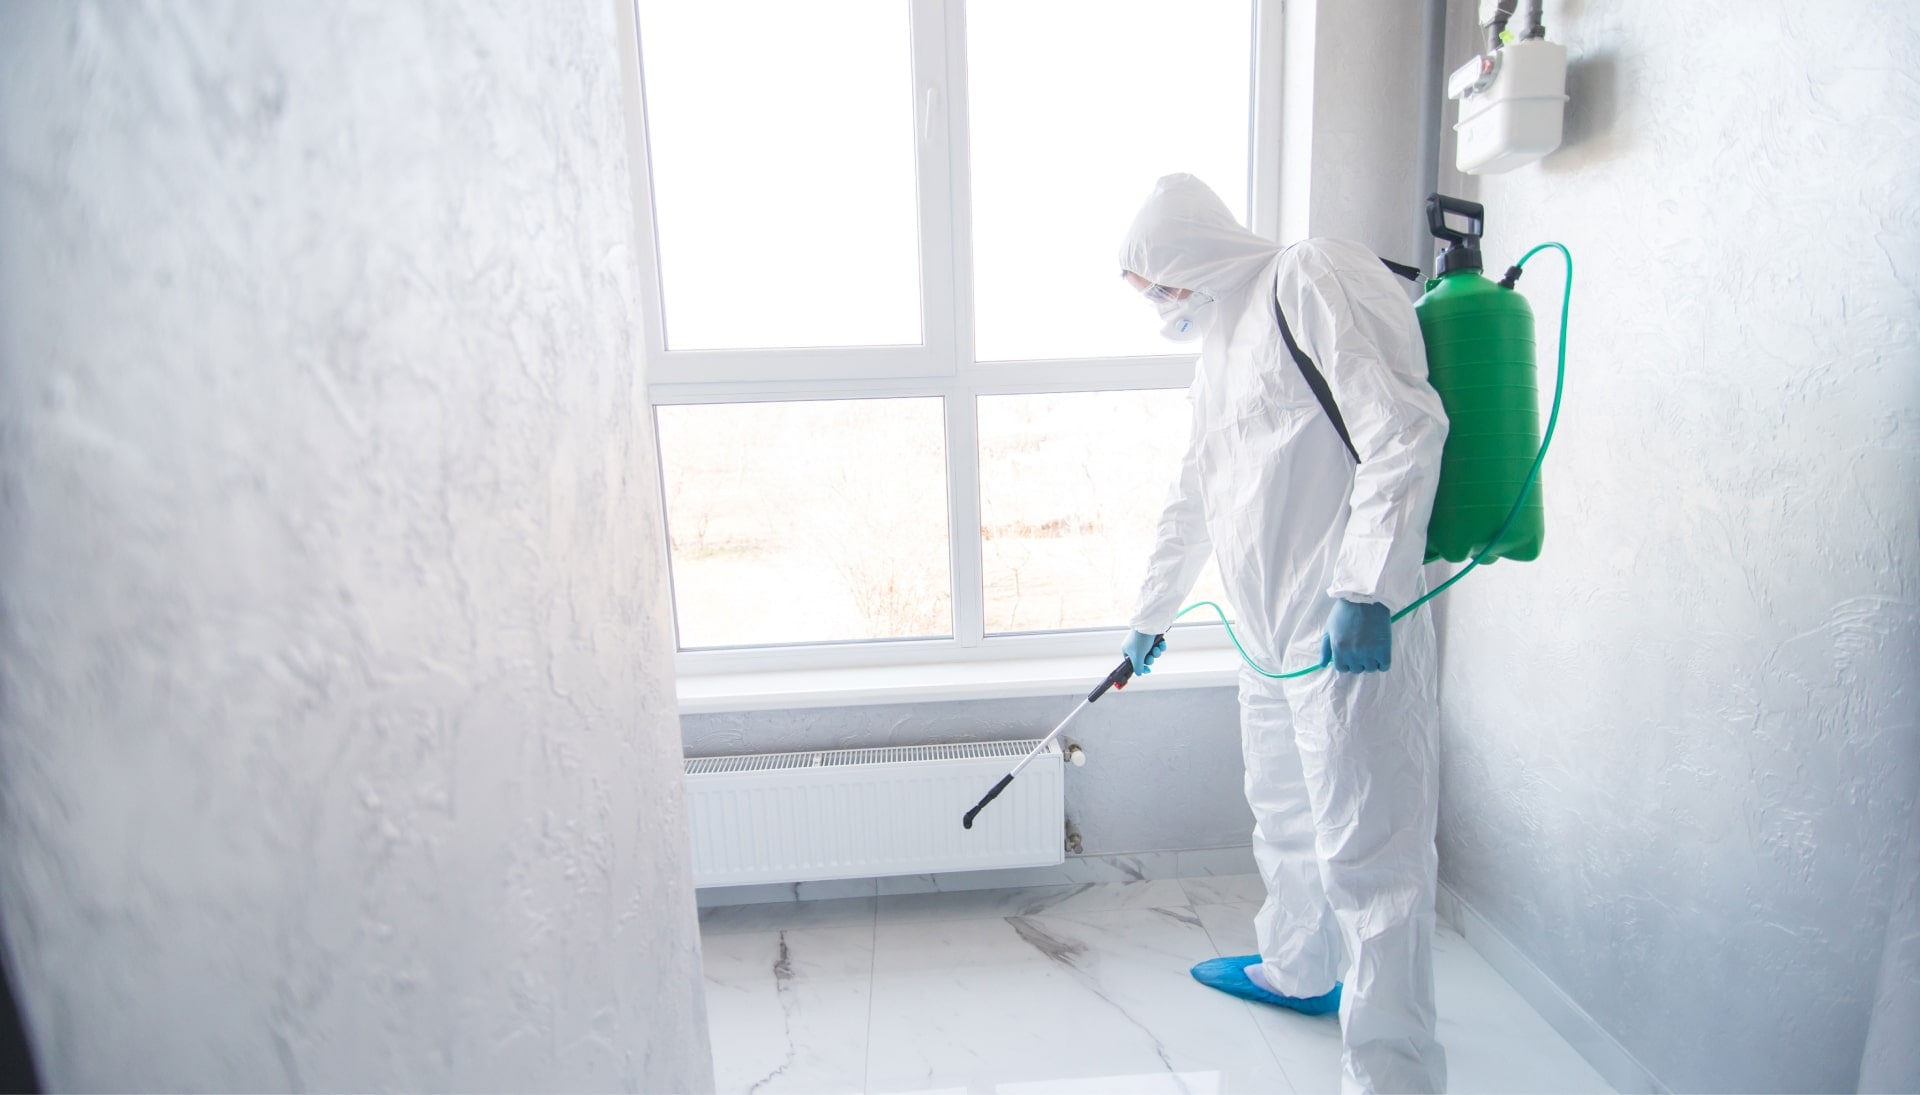 We provide the highest-quality mold inspection, testing, and removal services in the Cedar Rapids, Iowa area.